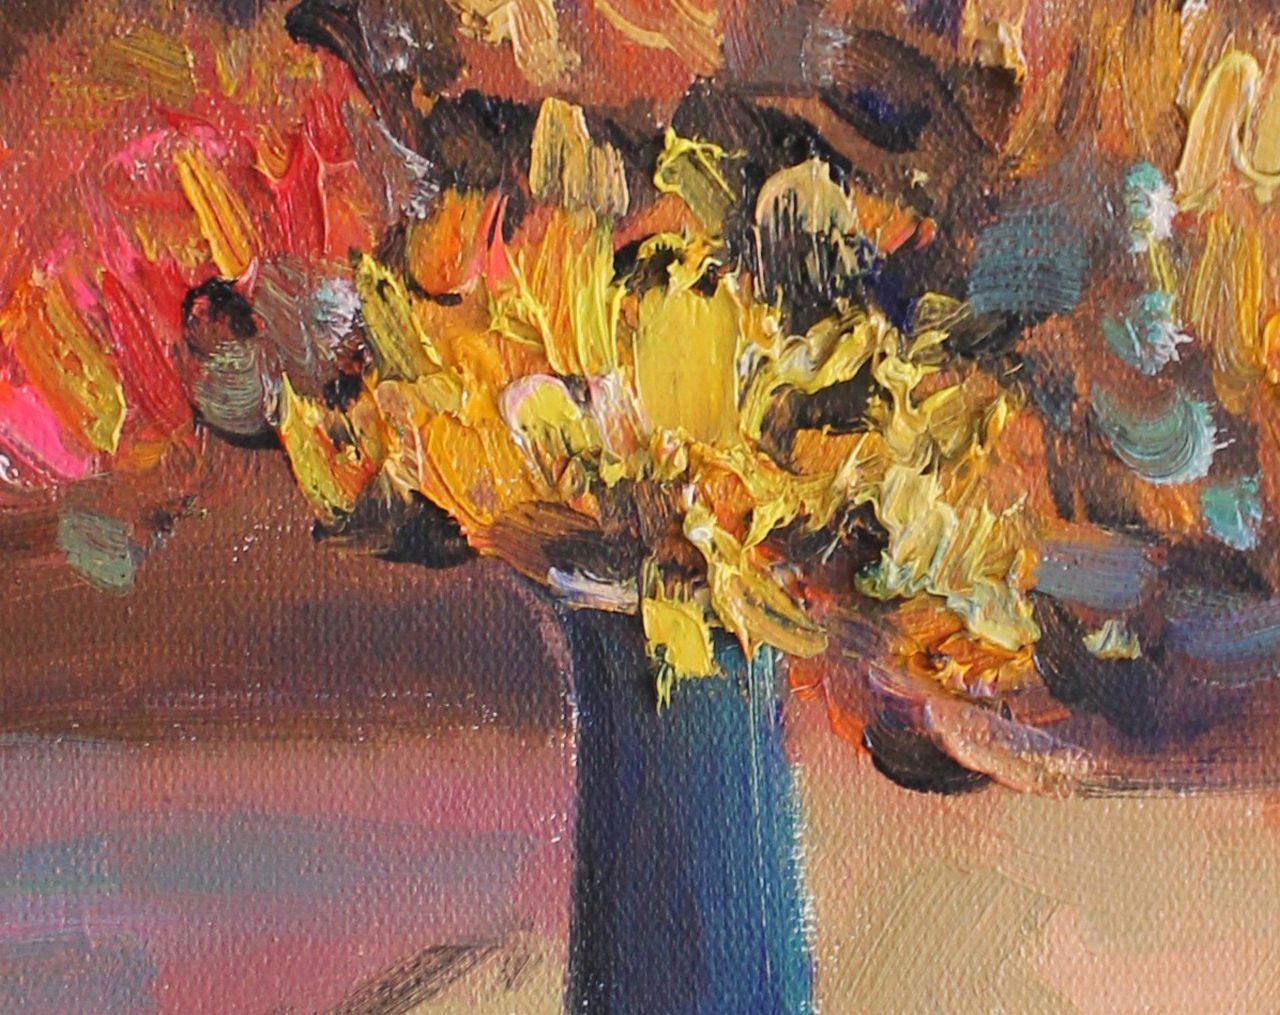 Oil Painting Still Life, Floral Painting, Original Abstract Art, Kitchen Wall Decor, Home Decor, Oil Painting Abstract, Canvas Art, 12x16